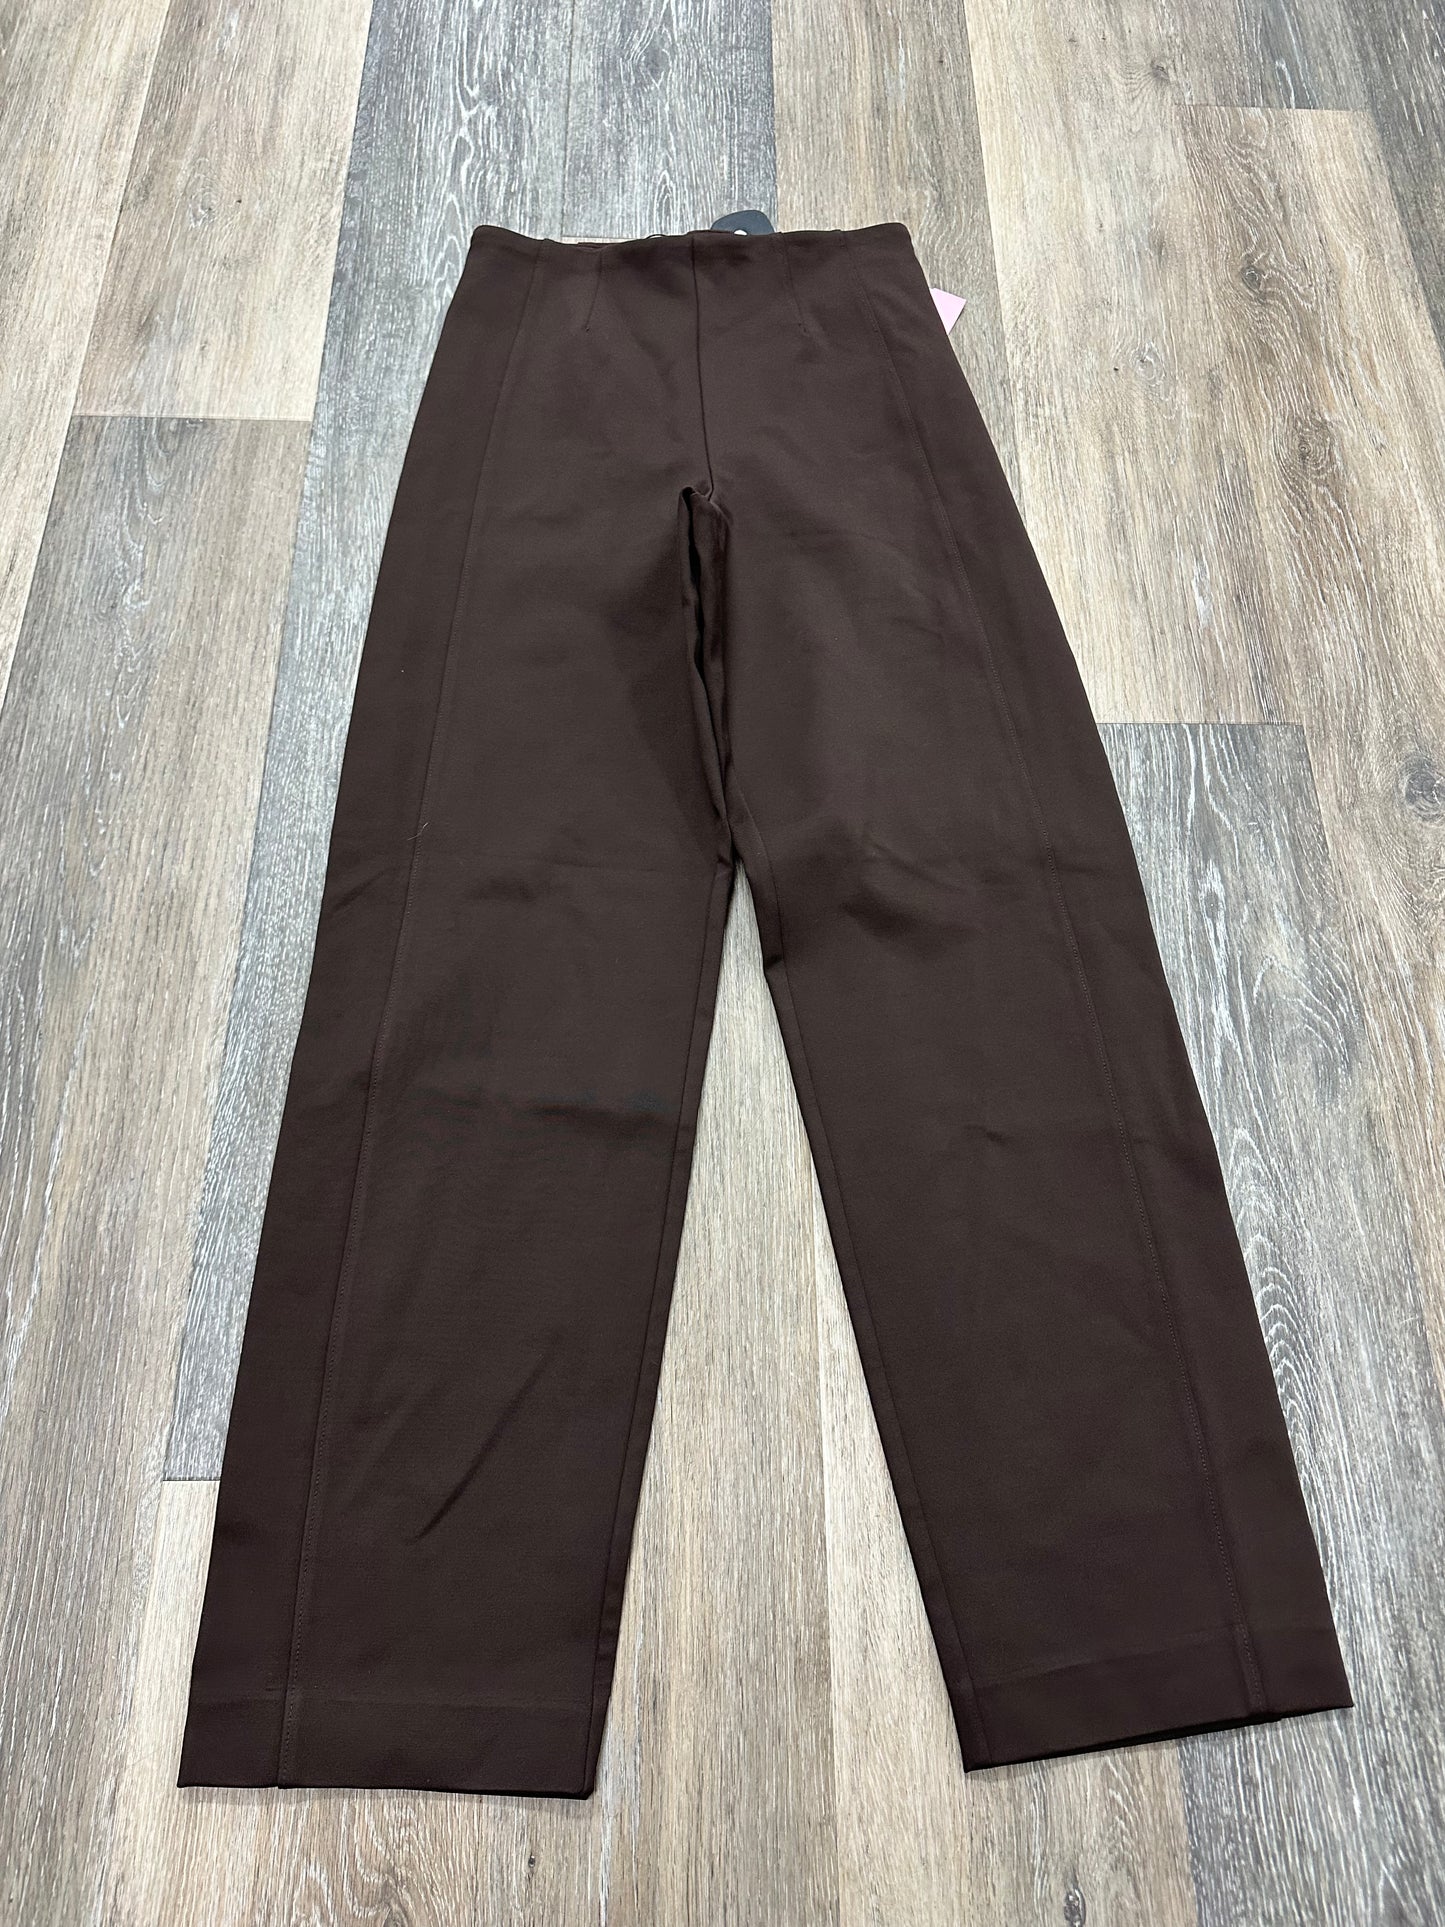 Pants Ankle By Express  Size: S